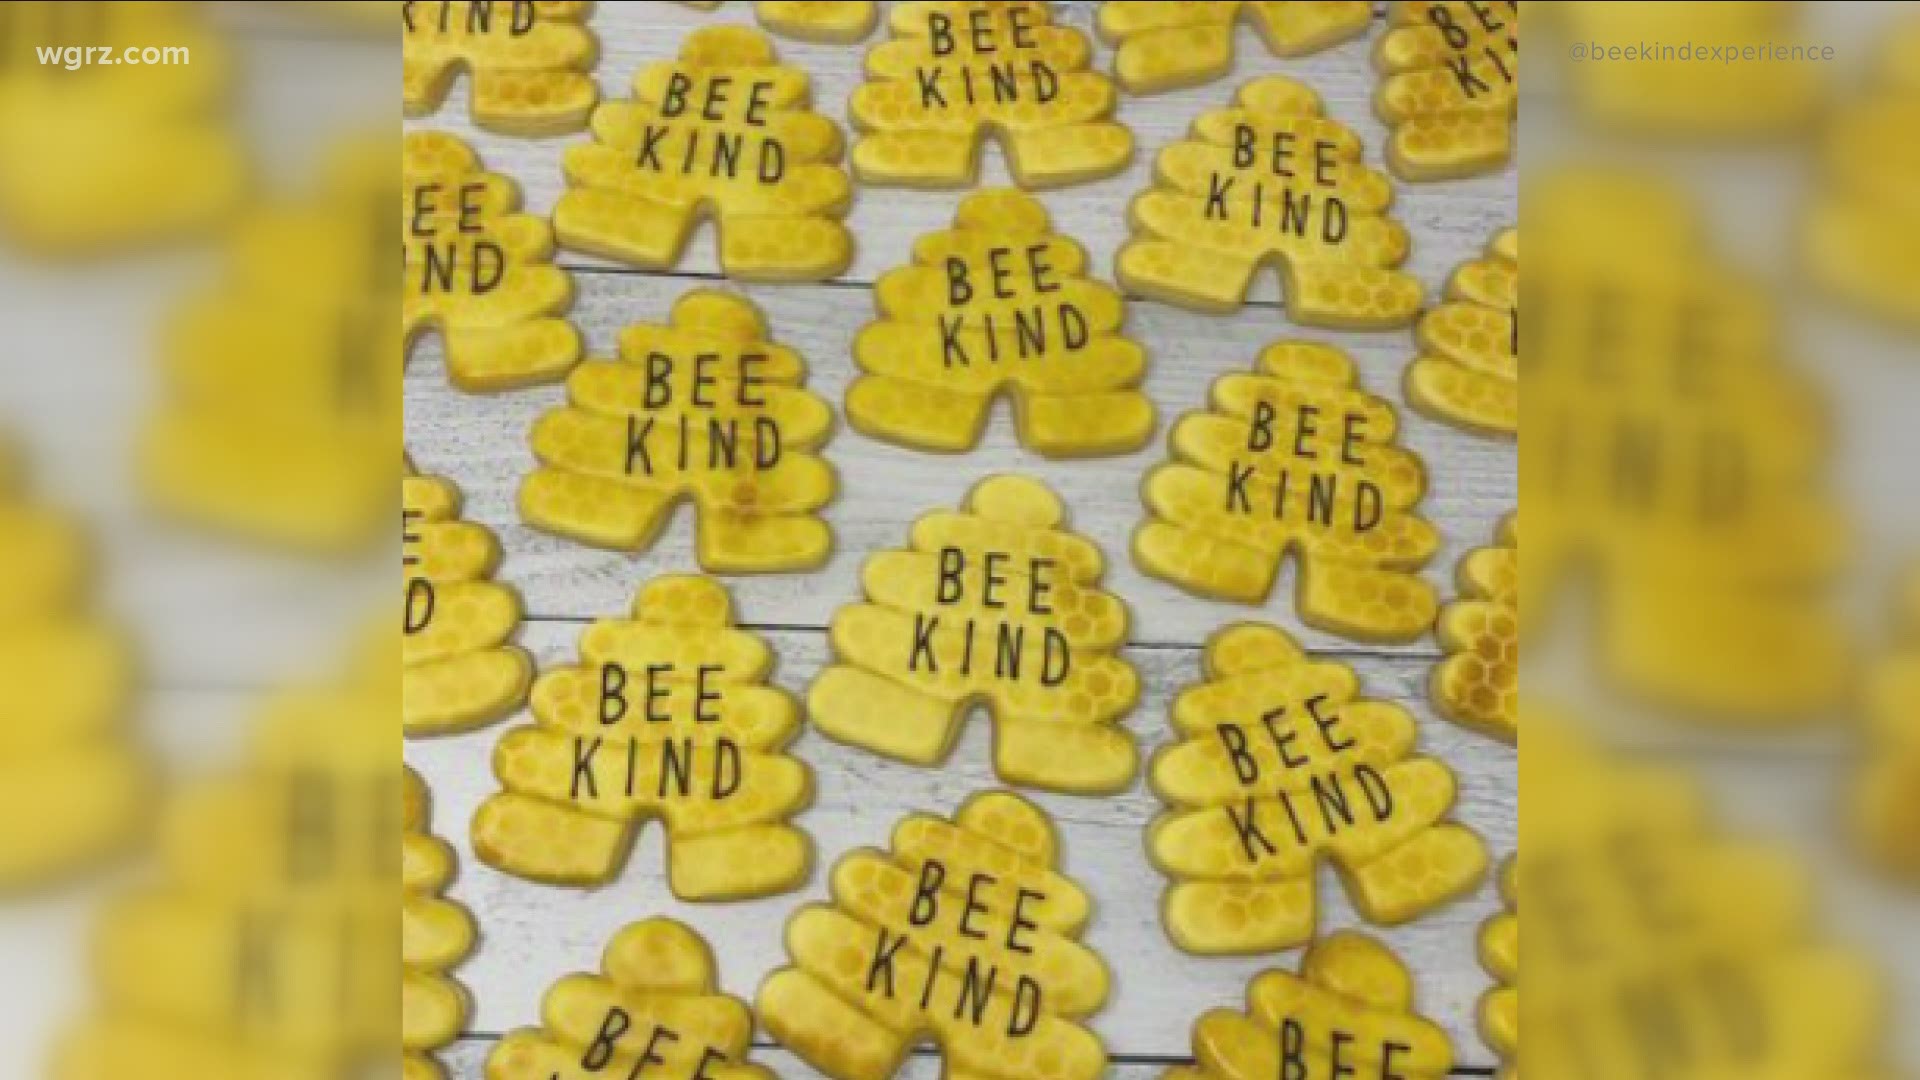 The Bee Kind Experience Spring Festival is happening Saturday at The Annex performance and event center in Chaffee.